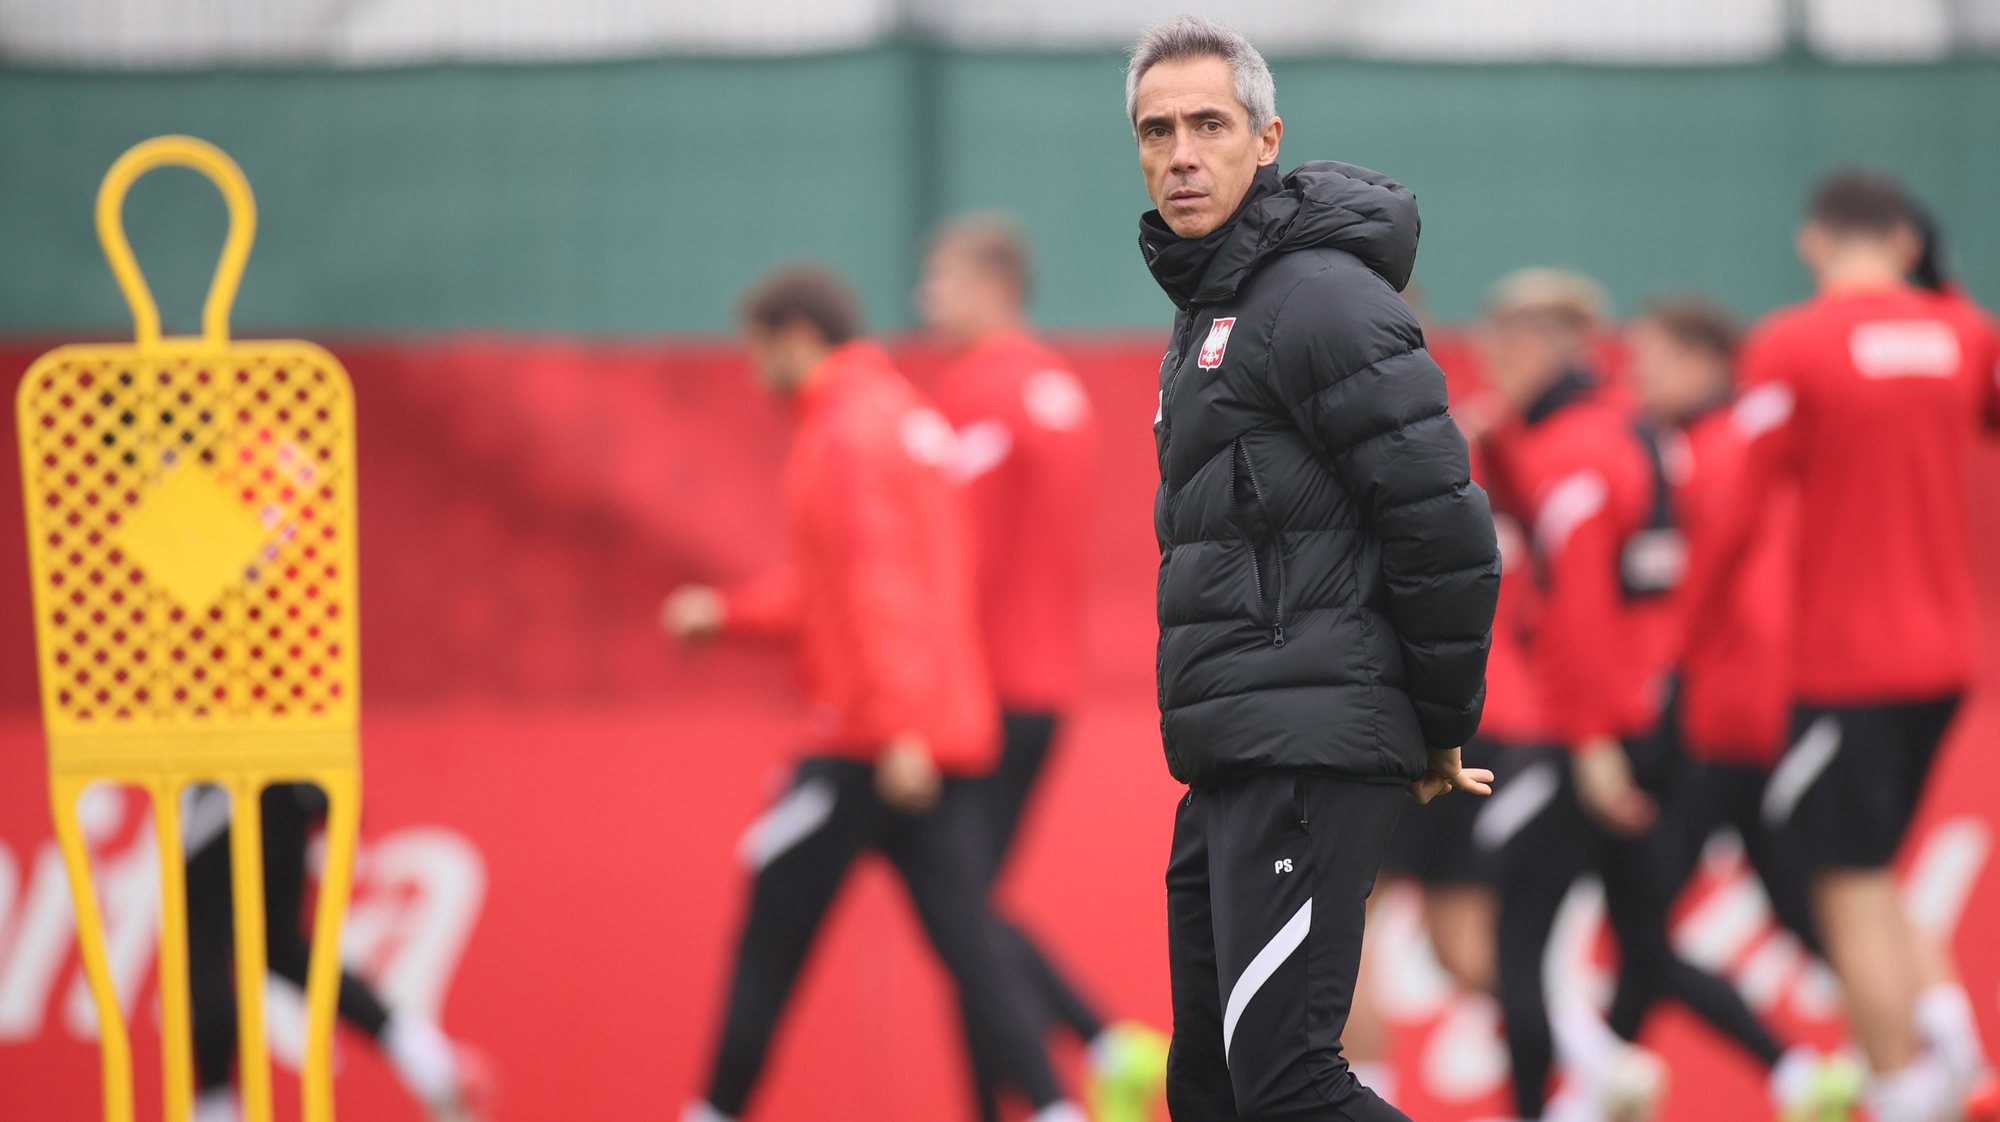 epa09581373 Polish national soccer team head coach Paulo Sousa leads his team&#039;s training session in Warsaw, Poland, 14 November 2021. Poland will face Hungary in the World Cup 2022 qualifying soccer match on 15 November in Warsaw.  EPA/Leszek Szymanski POLAND OUT